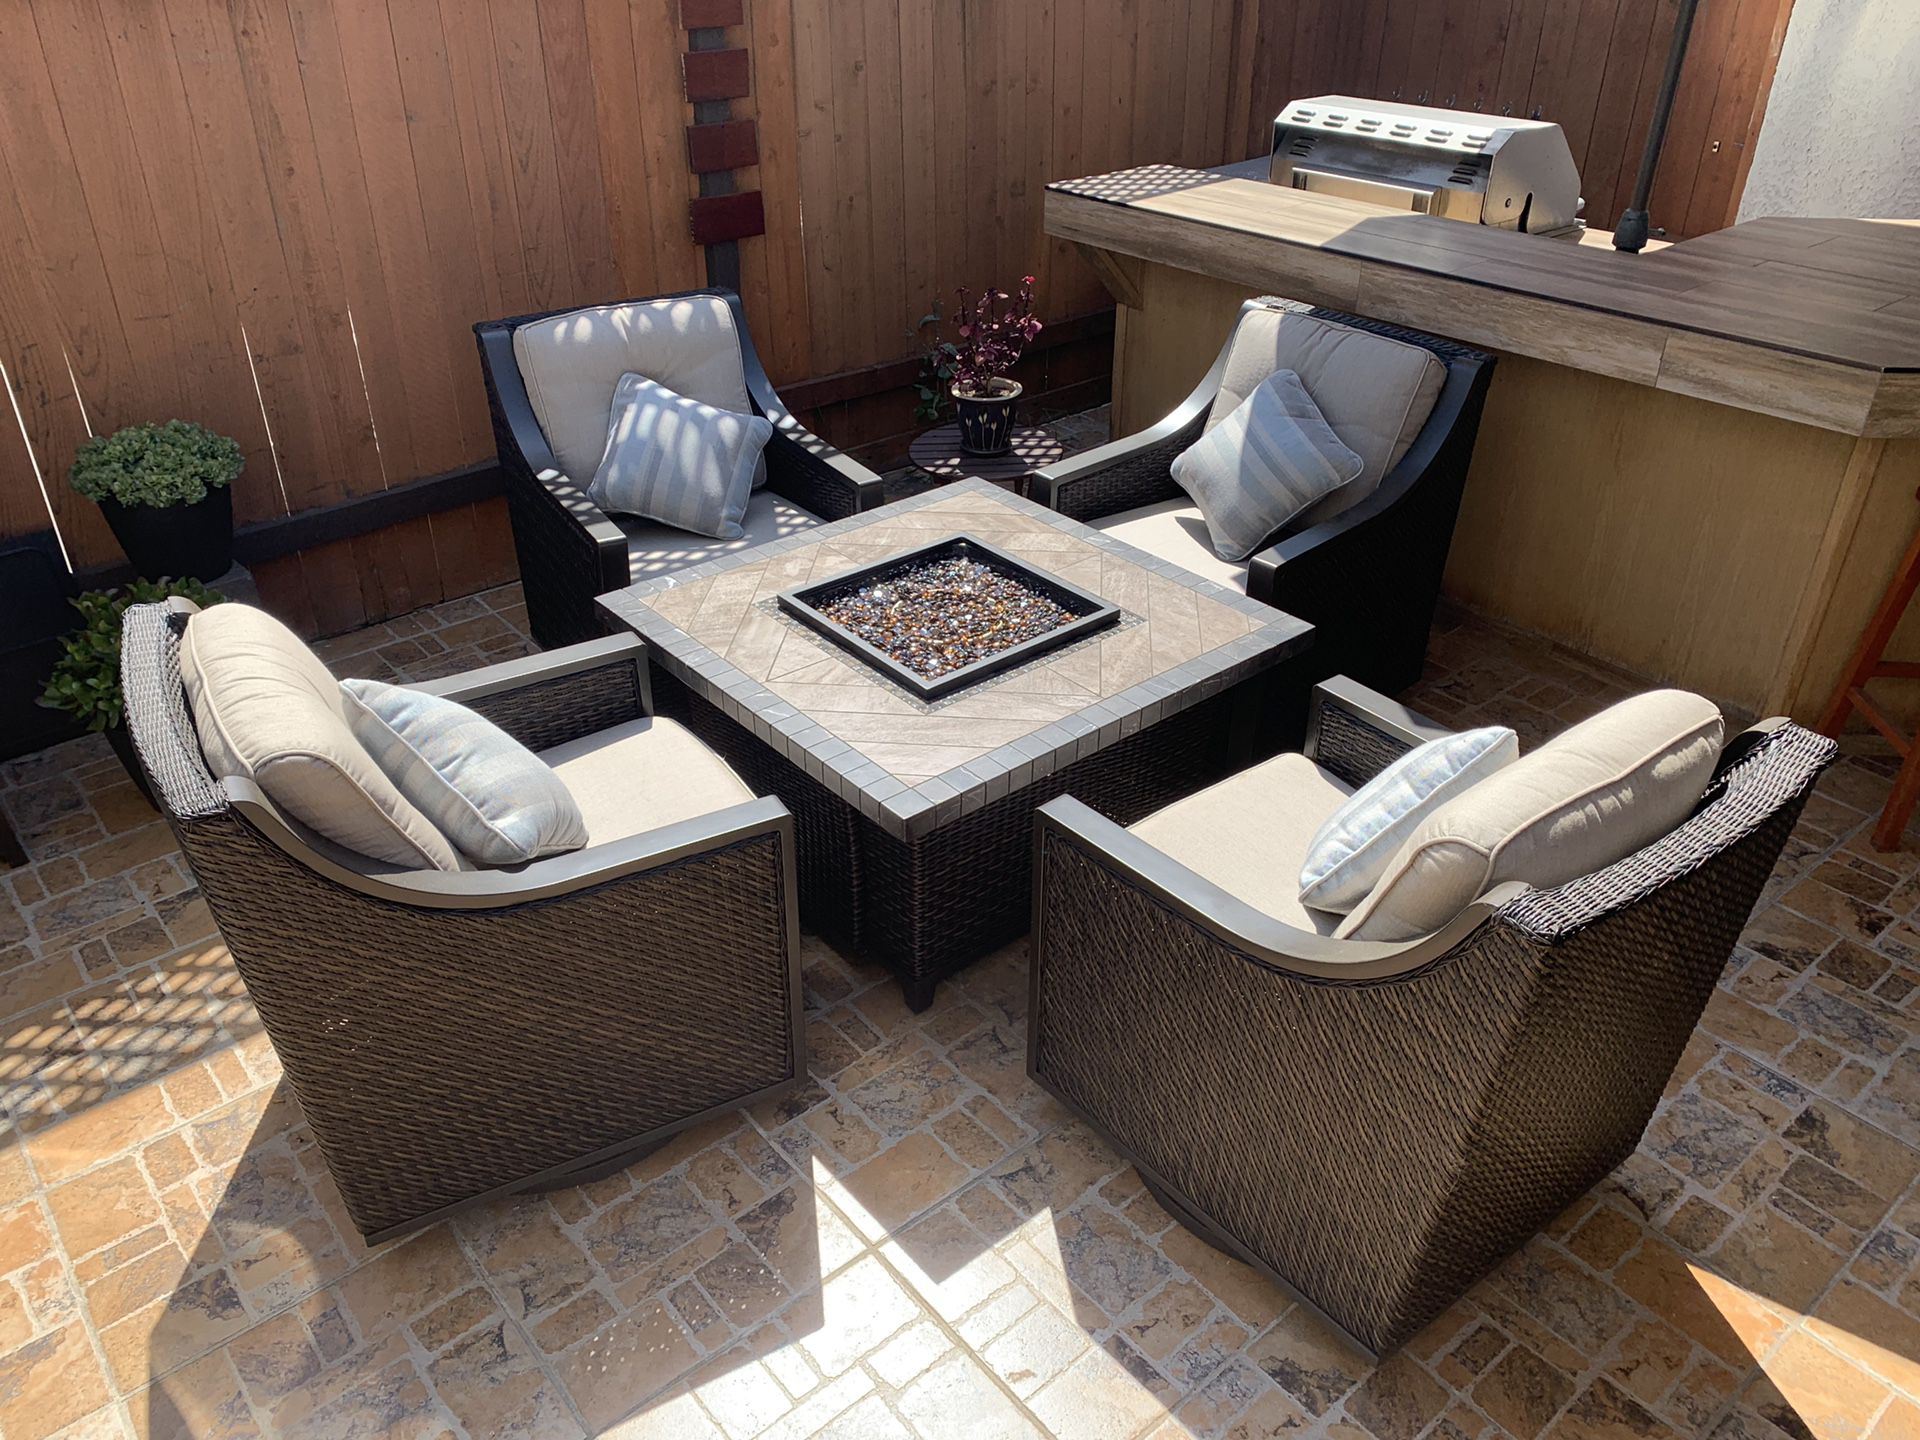 Outdoor Patio Furniture - 4 Swivel Glider Chairs(Fire Pit not included)